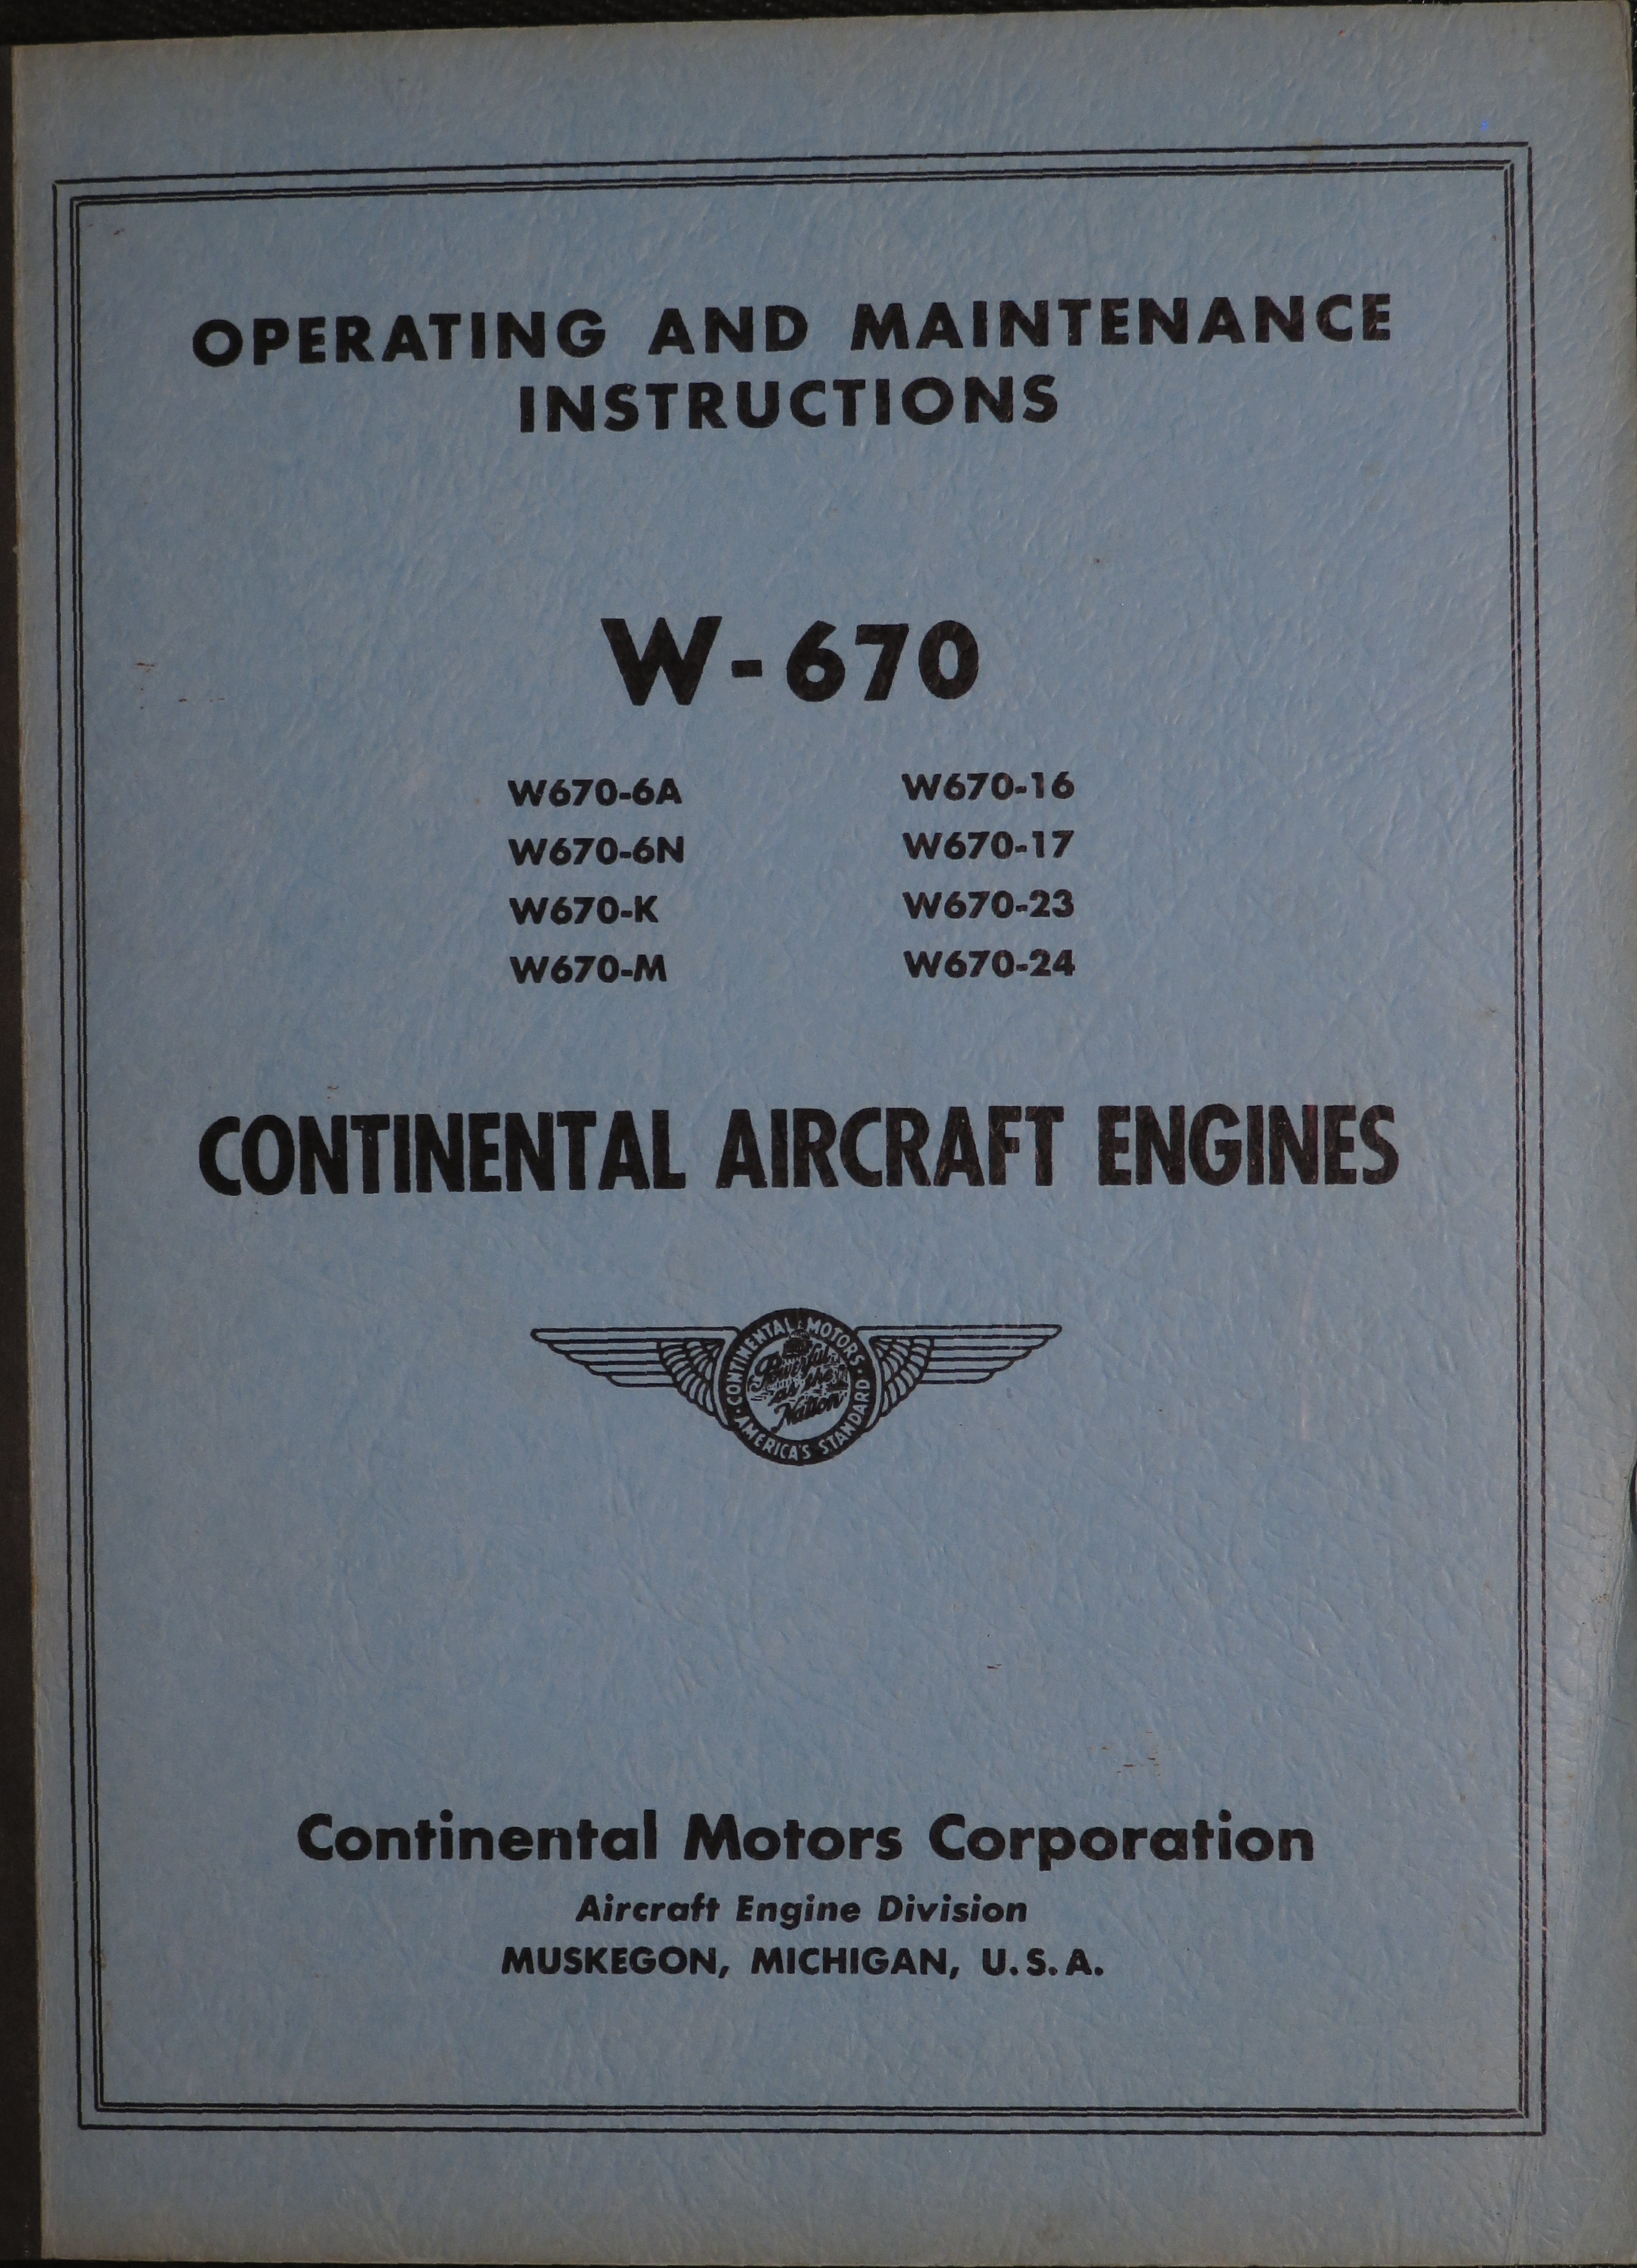 Sample page 1 from AirCorps Library document: Operation and Maintenance Instructions for W670 Series Engines